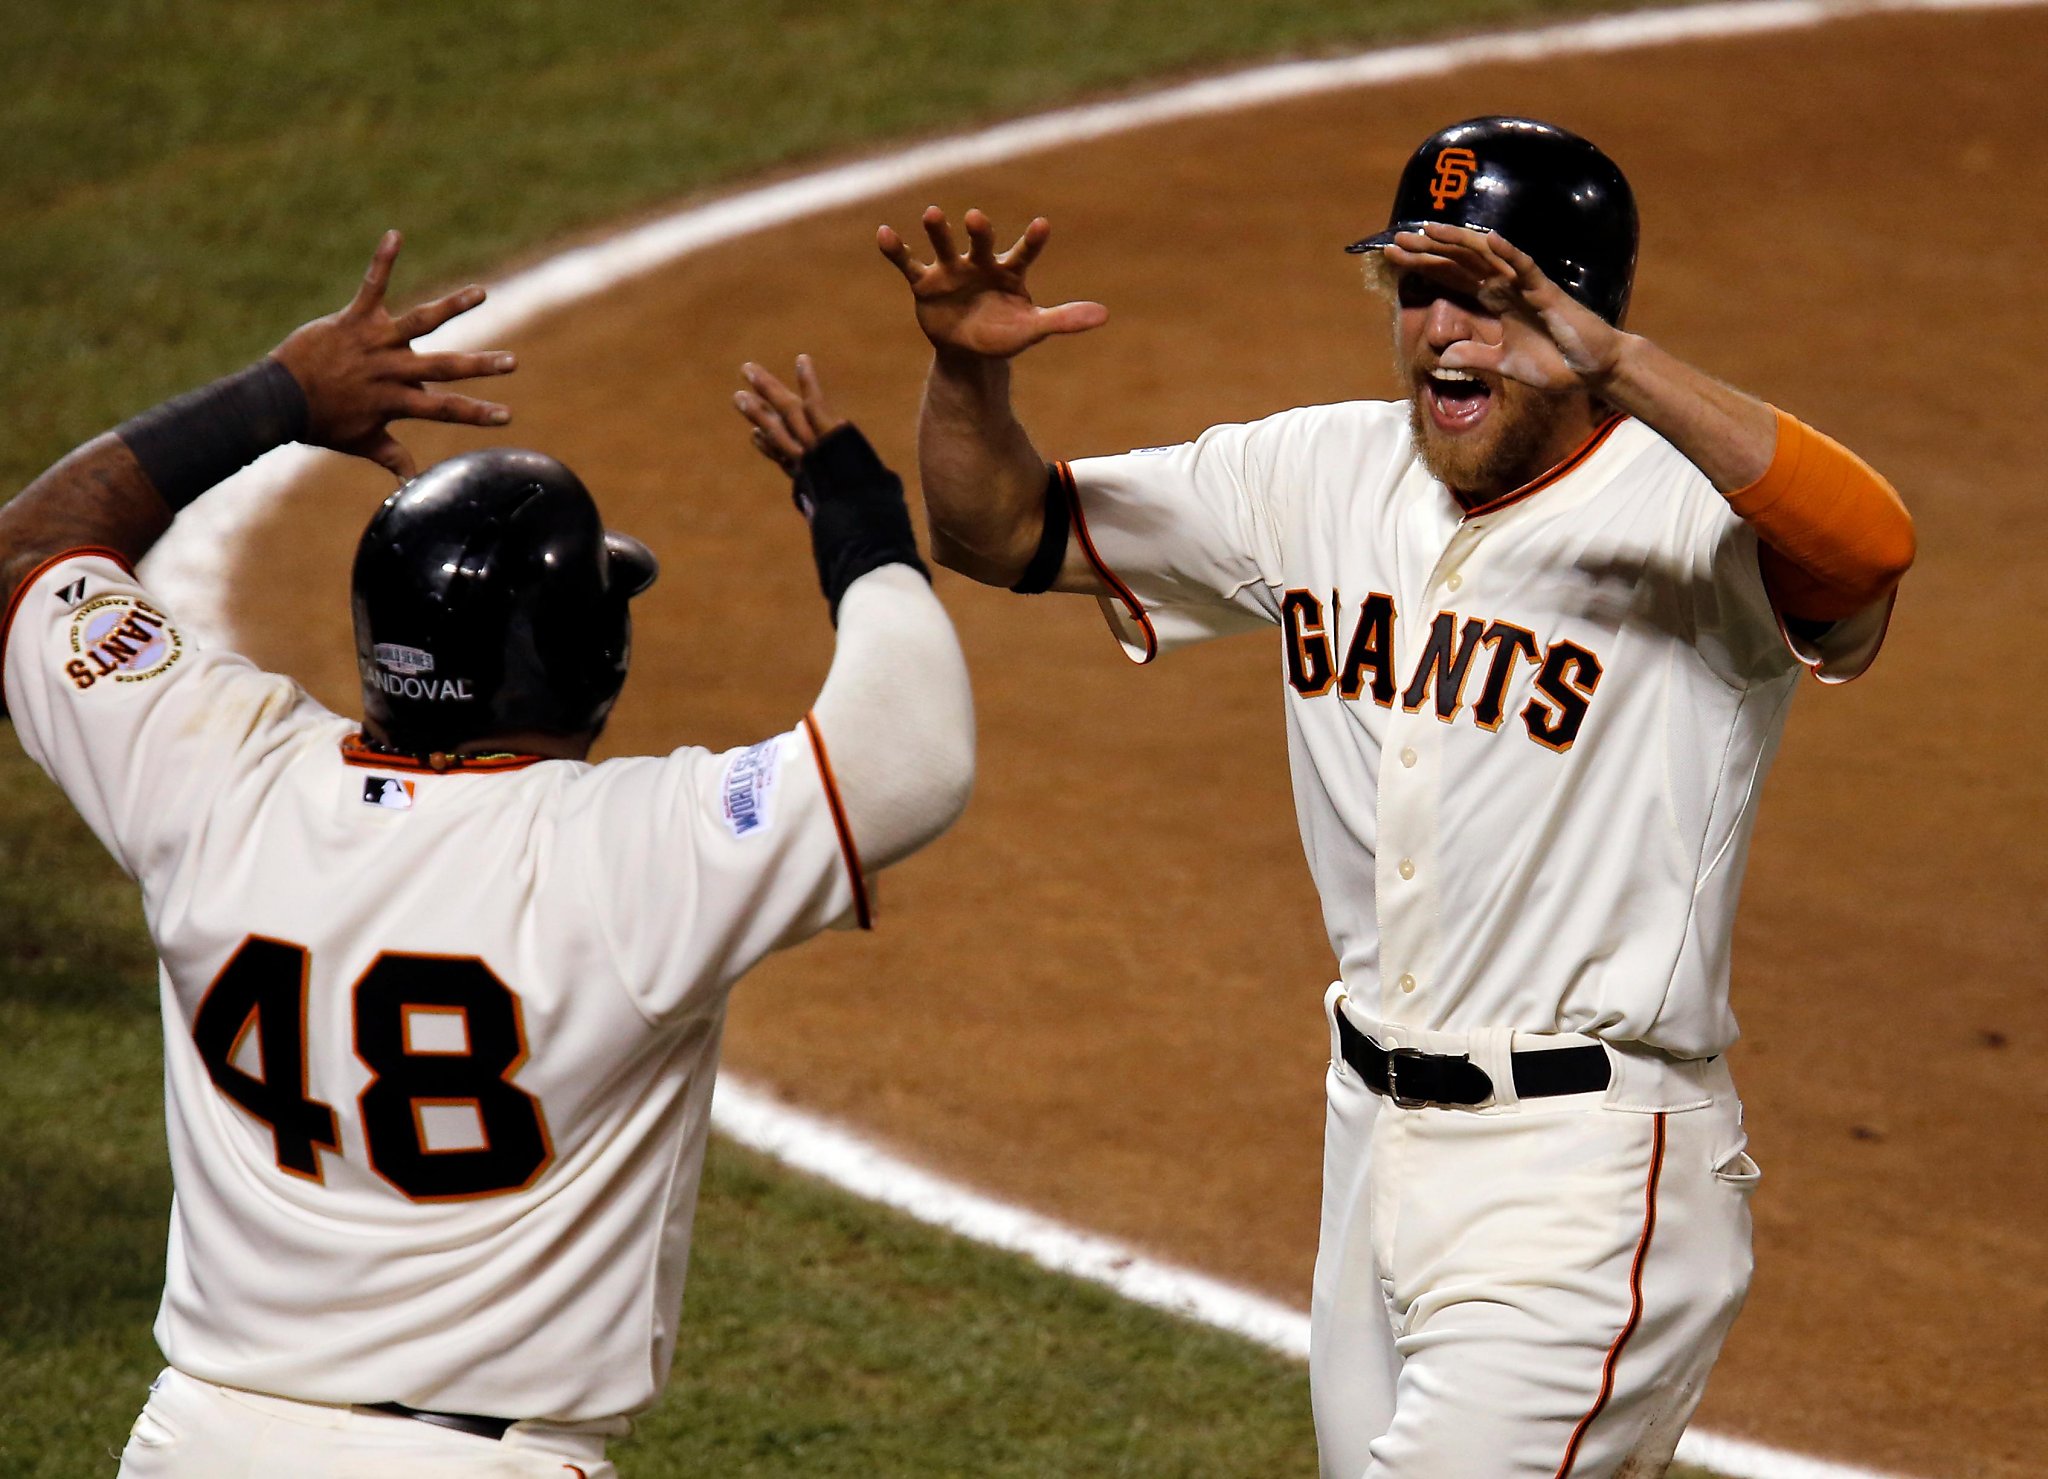 Why Hunter Pence and Pablo Sandoval will be invaluable to these Giants